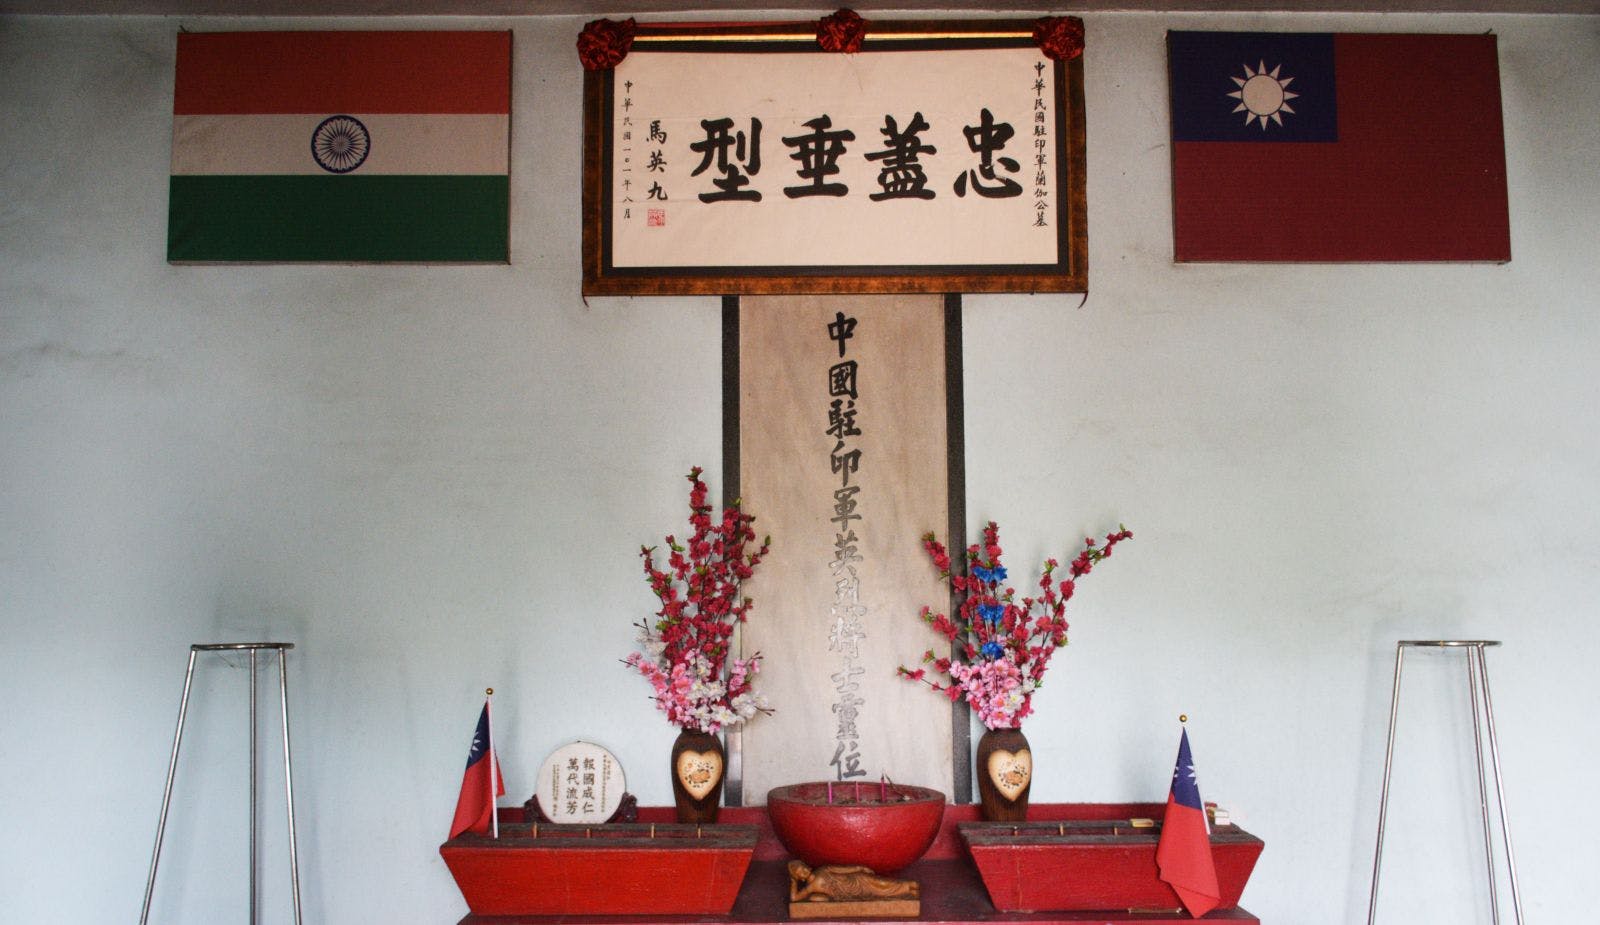 Memorial in the ground floor of the temple